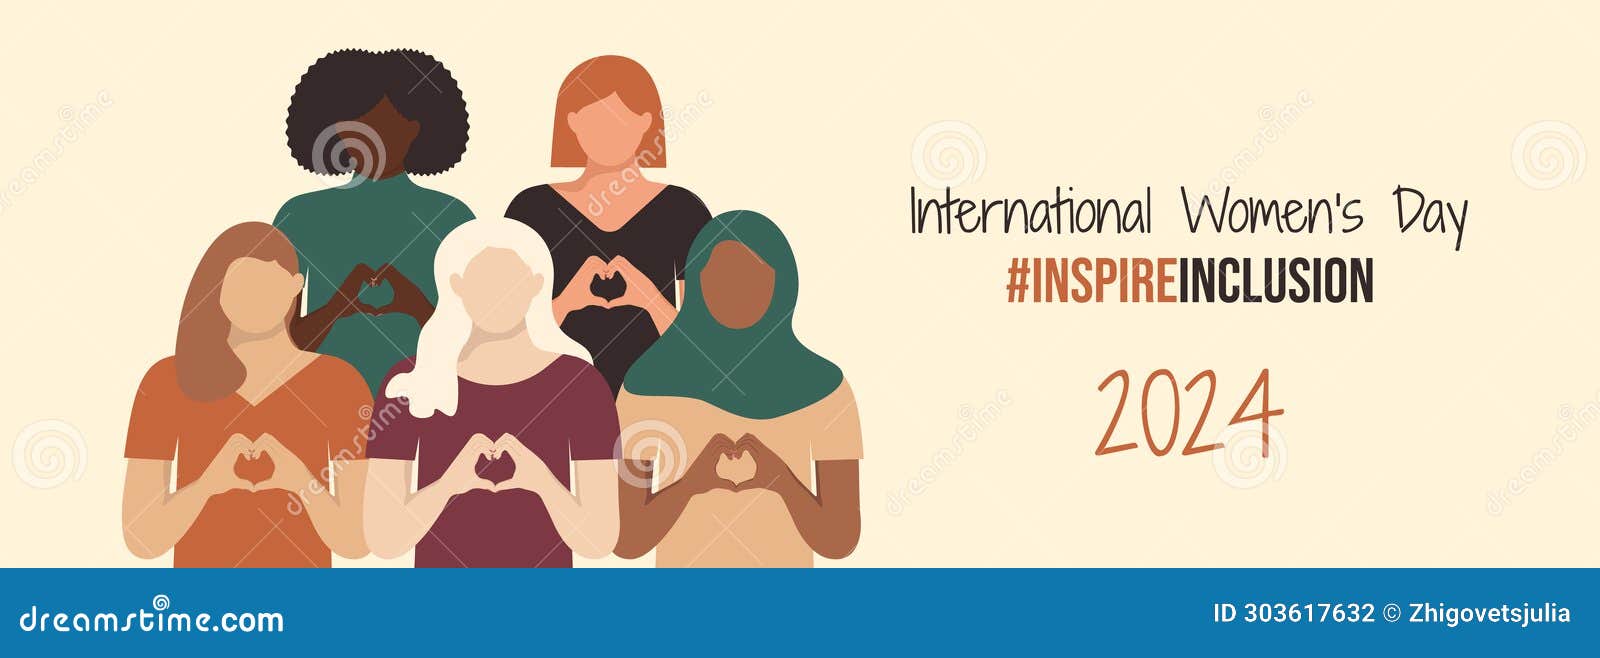 international women's day banner 2024. iwd inspireinclusion horizontal  with girls shows heart  with their hands.